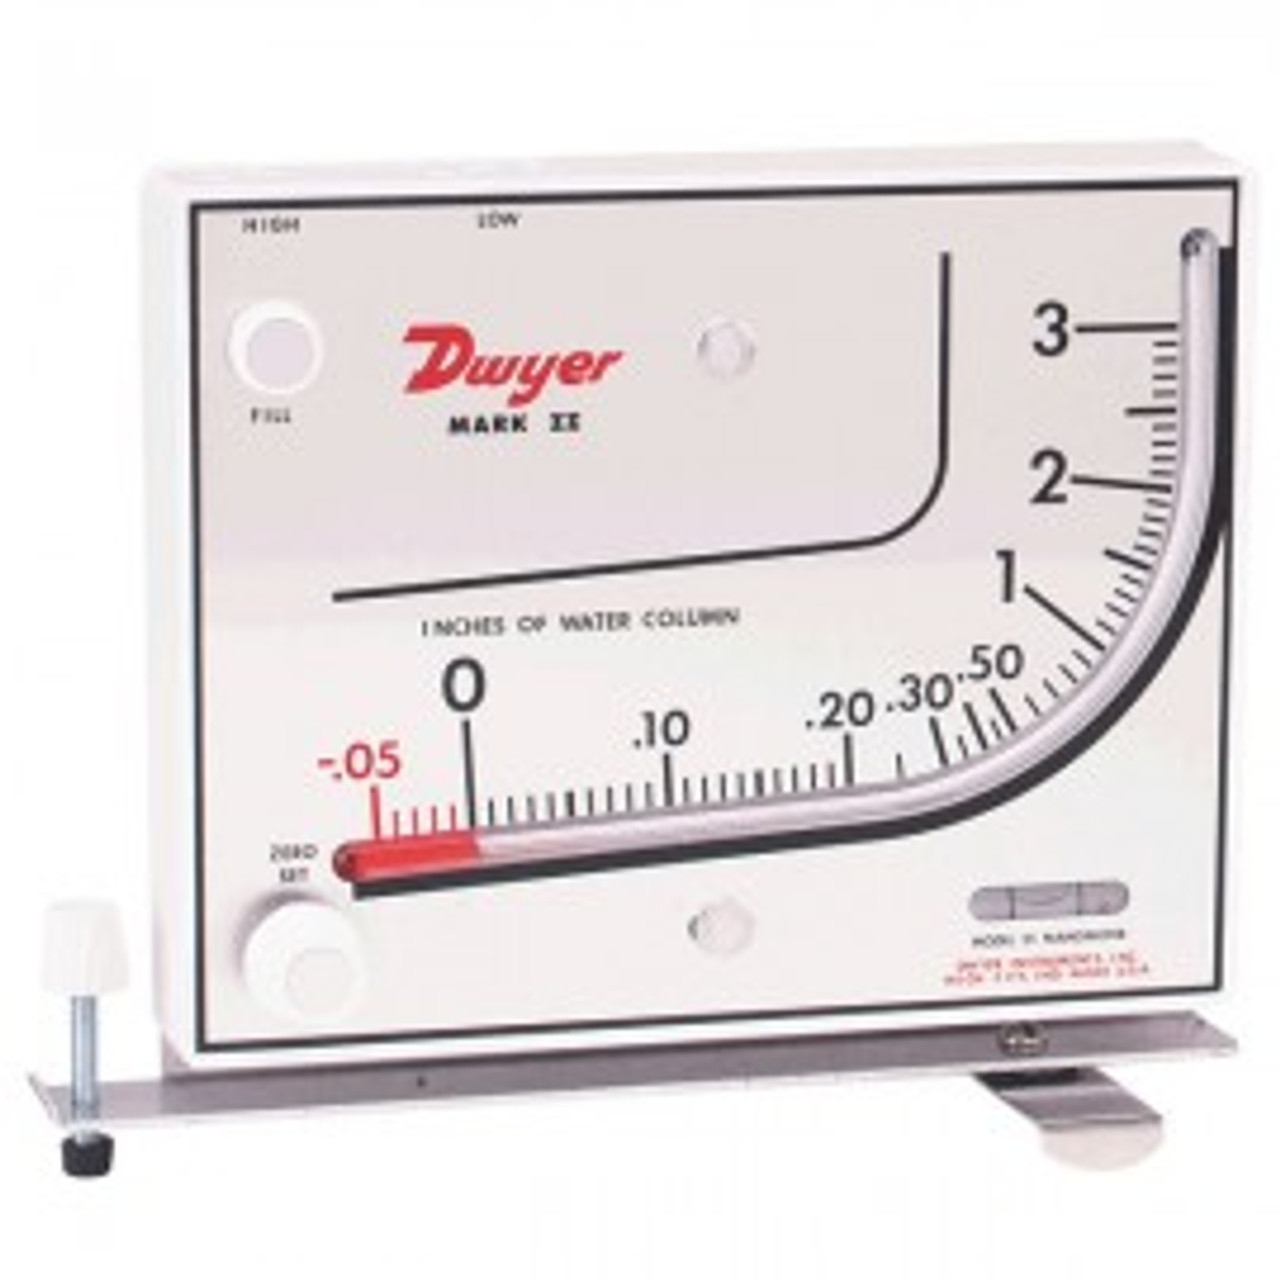 Dwyer MARK II 26 Inclined/Vertical Manometer (0-7"w.c.)